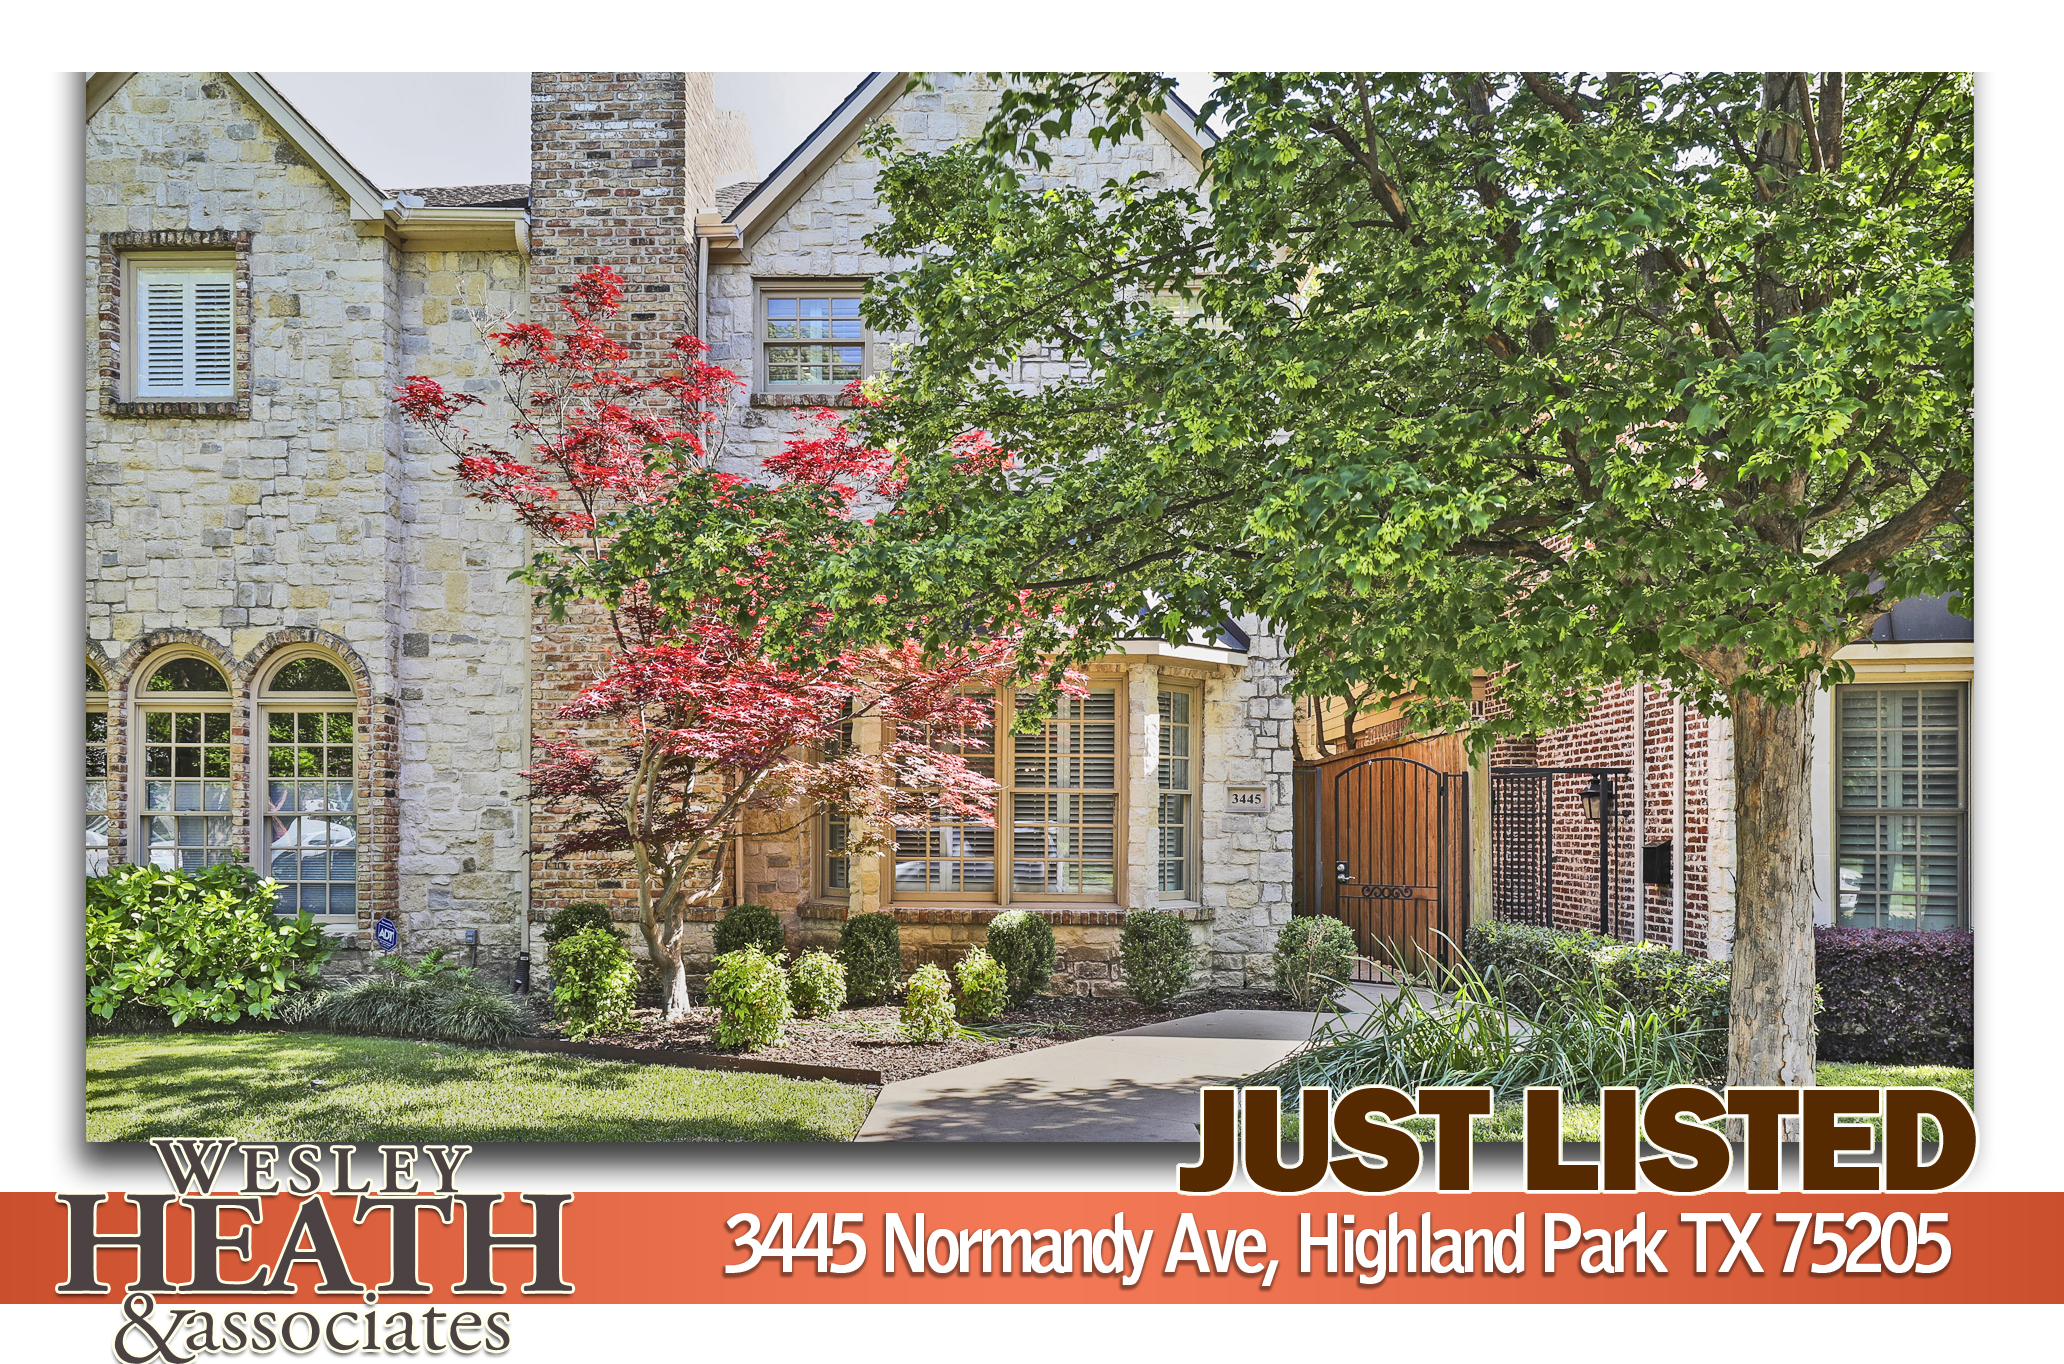 3445 Normandy Ave - Listing Courtesy of Wesley Heath Real Estate Brokerage